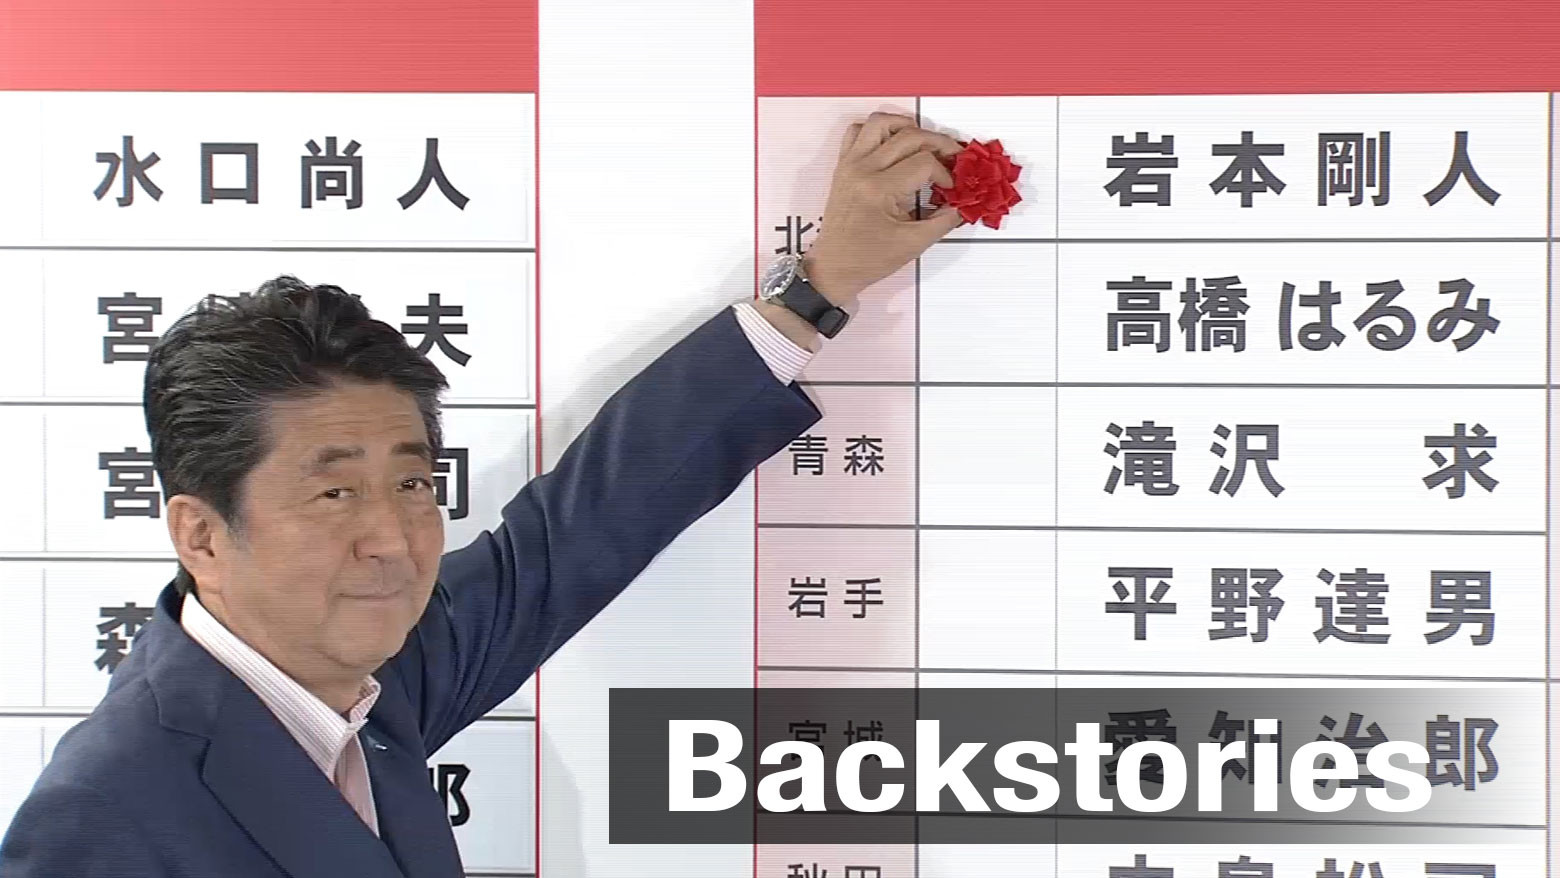 Effects of Japan's election on future politics